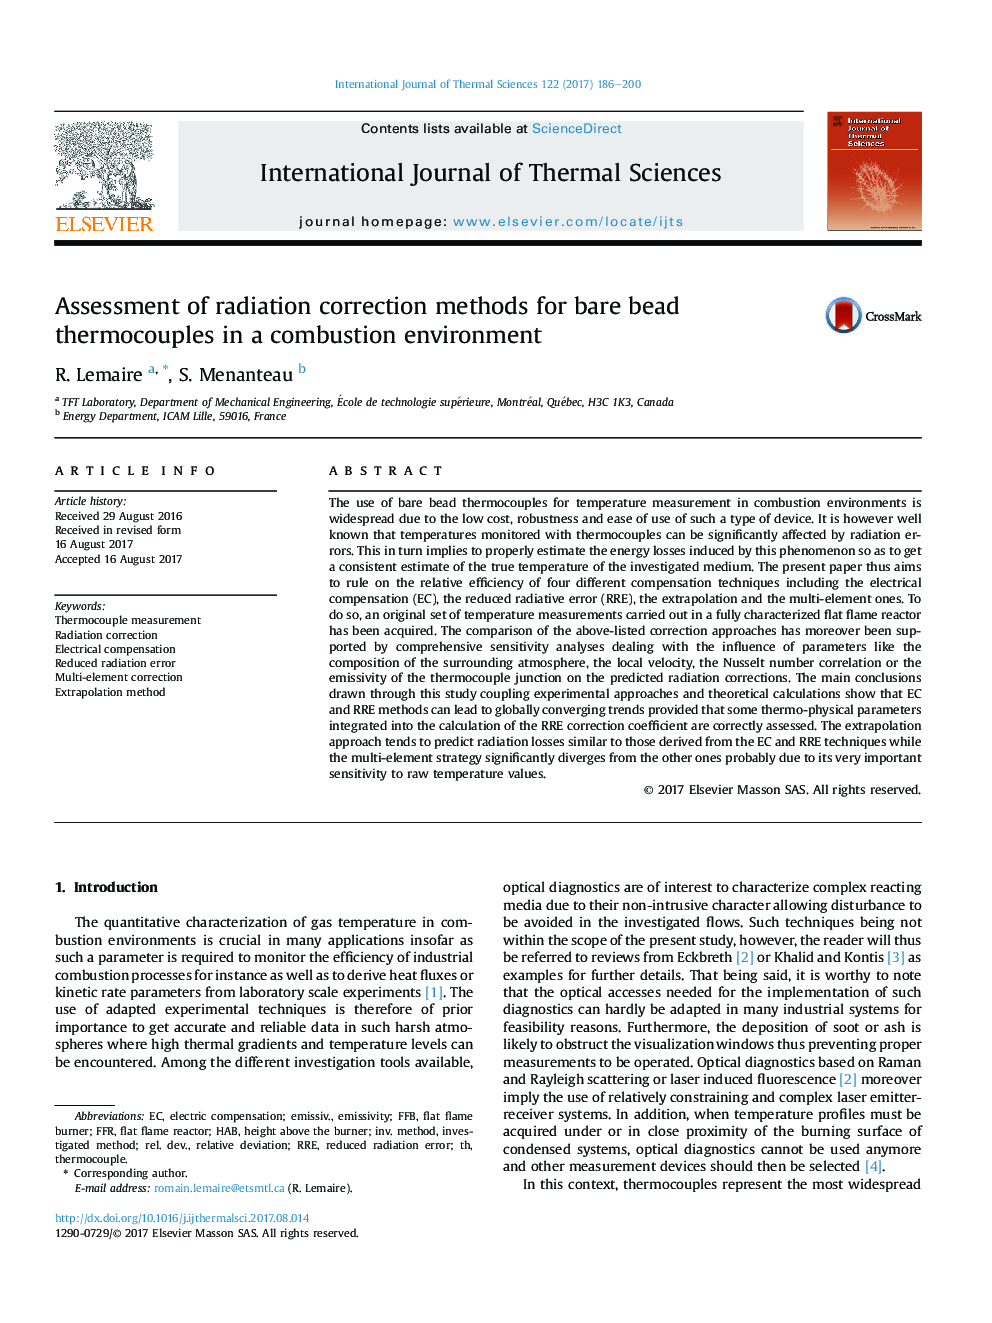 Assessment of radiation correction methods for bare bead thermocouples in a combustion environment